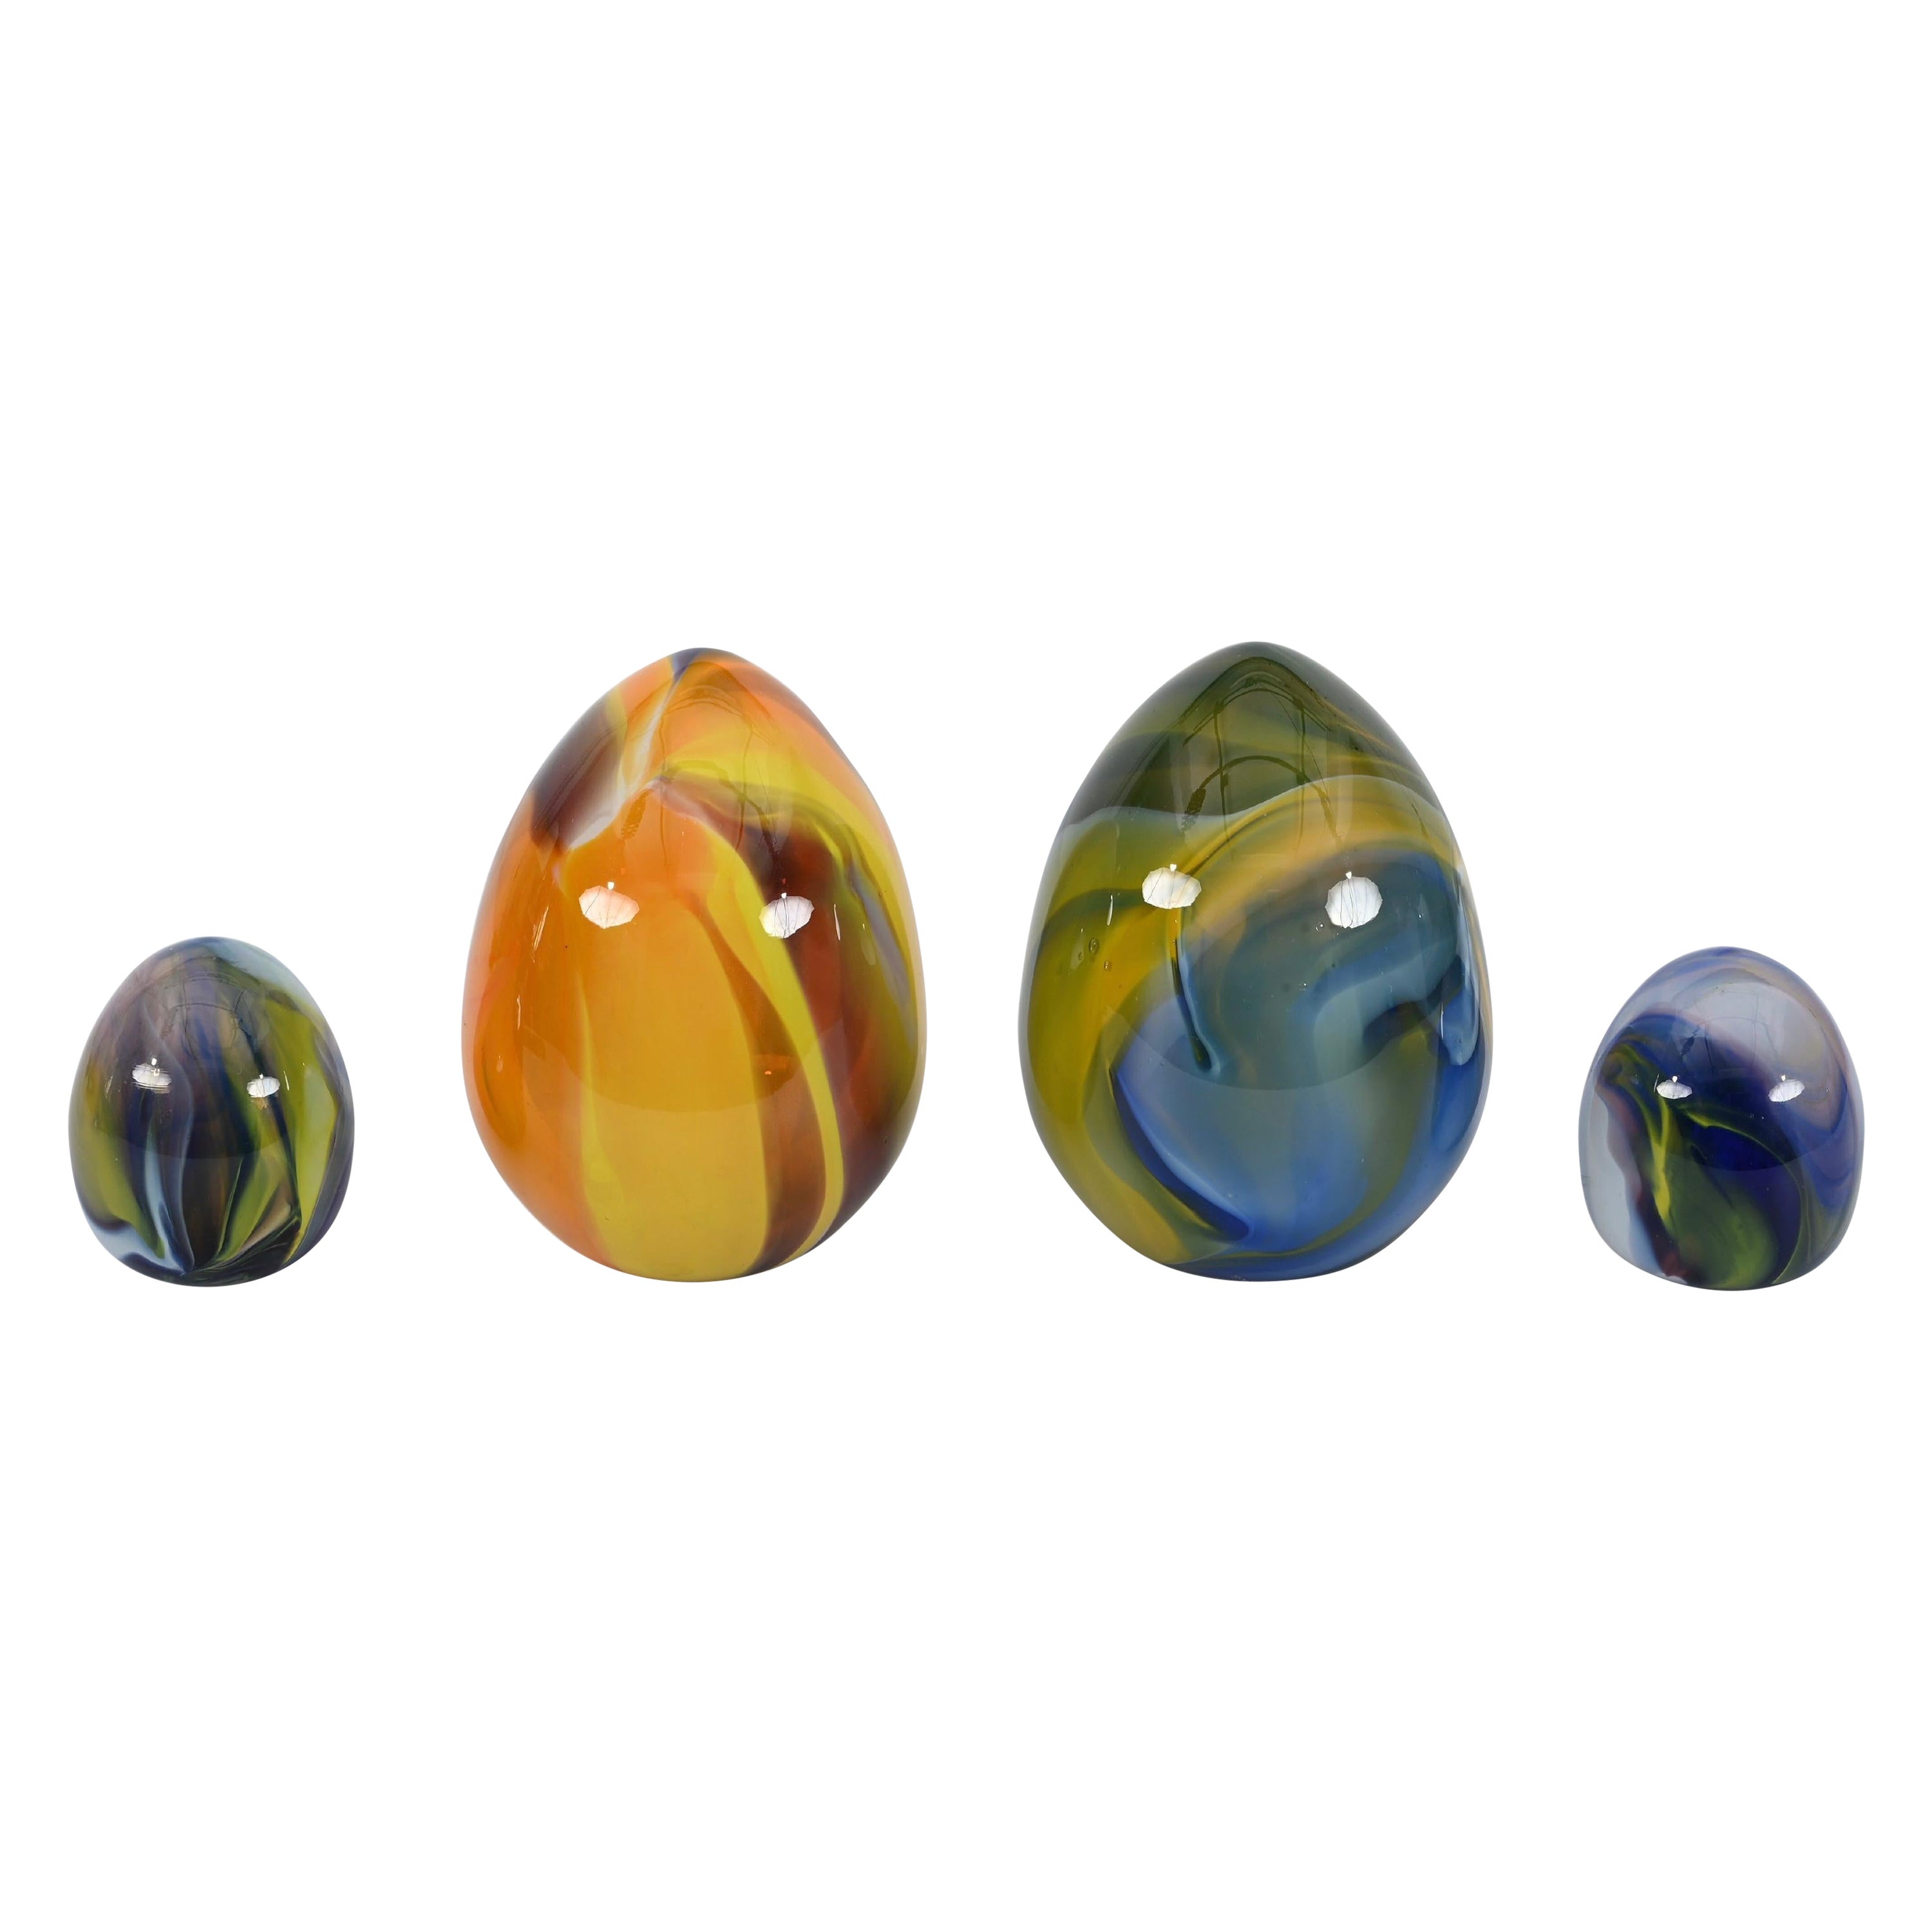 Set of Murano Hand-Blown Colored Glass Eggs, by Archimede Seguso, Italy, 1970s For Sale